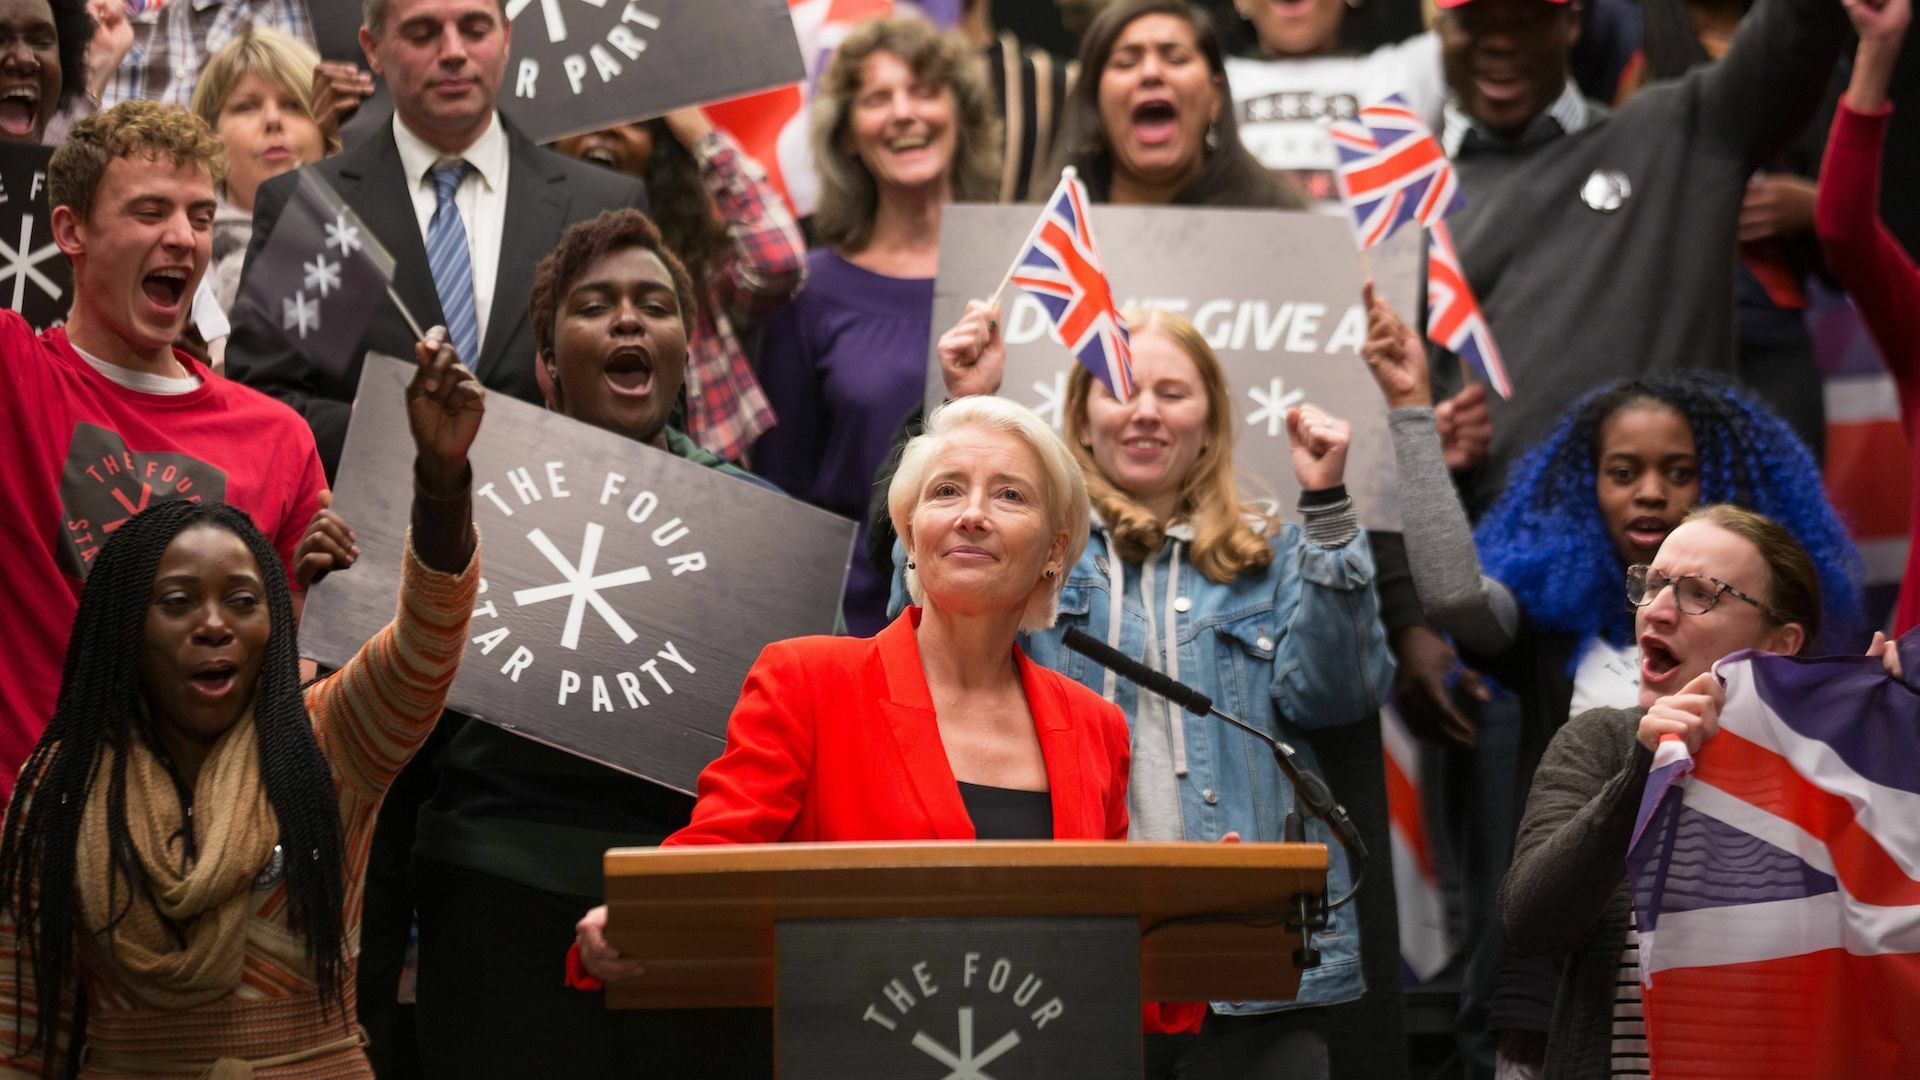 Emma Thompson as far-right politician Vivienne Rook surrounded by supporters in "Years and Years."